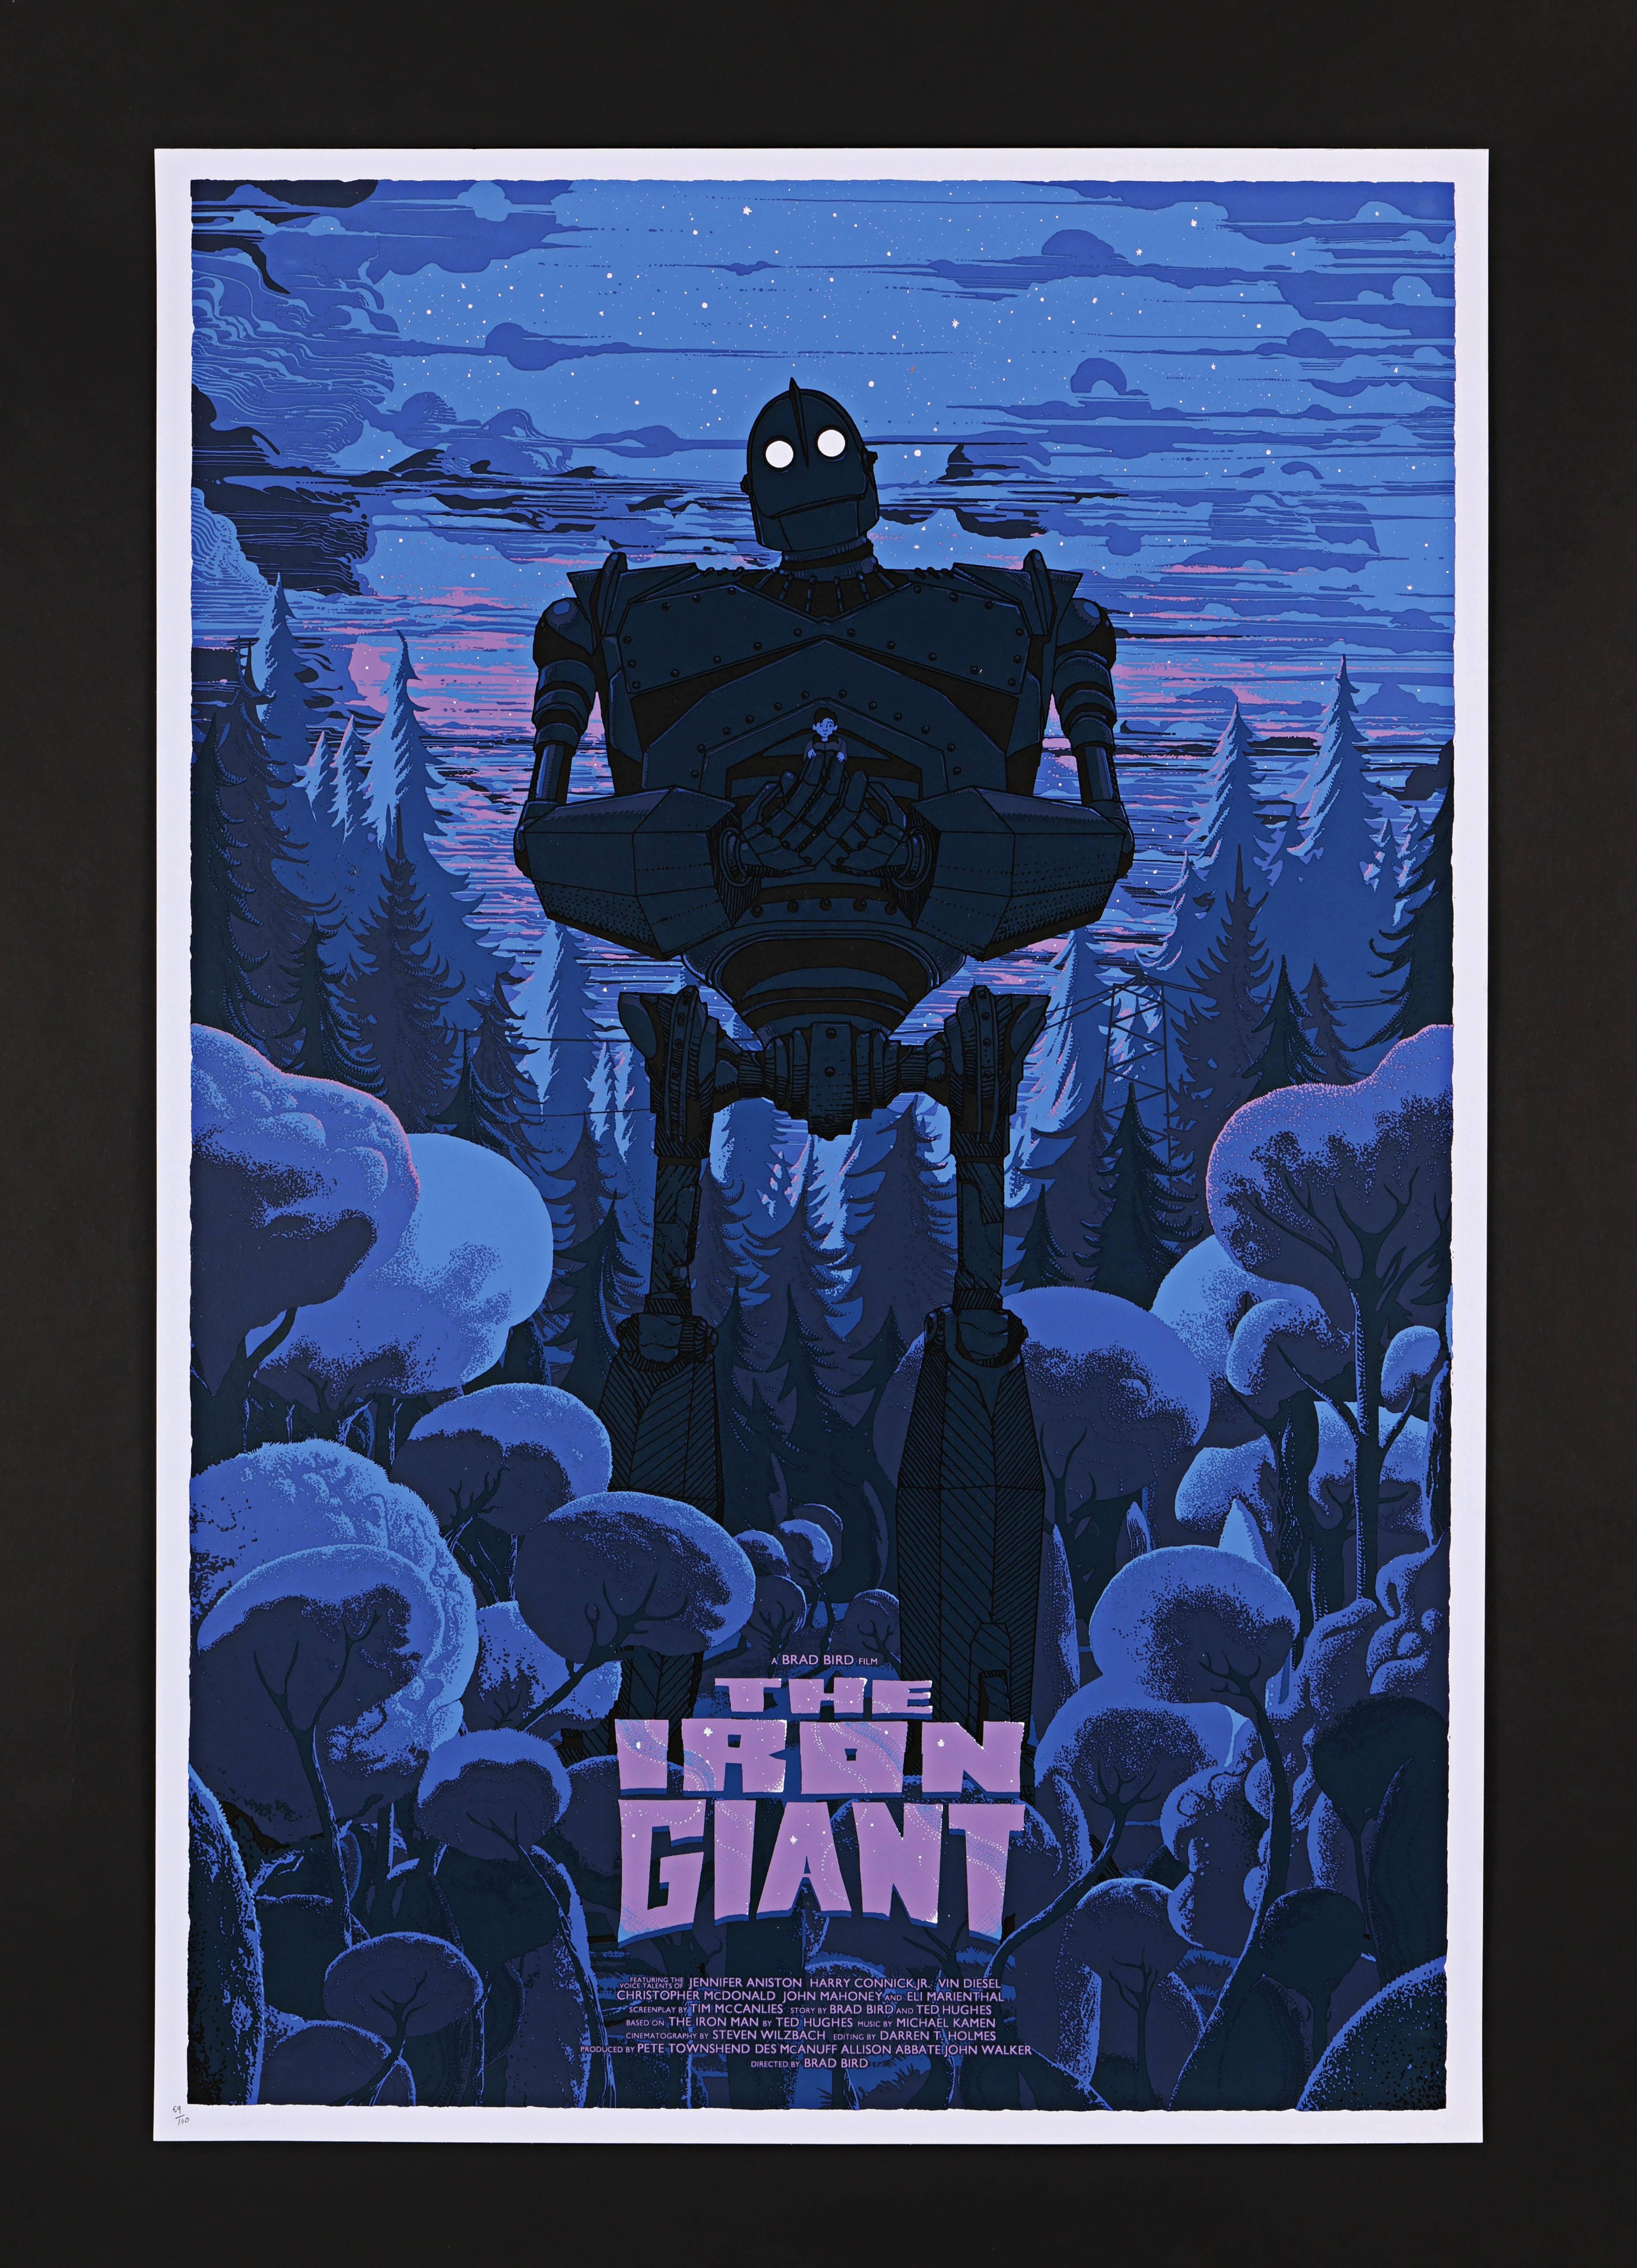 THE IRON GIANT (1999) - Hand-Numbered Limited Edition Variant Print by Kilian Eng, 2016